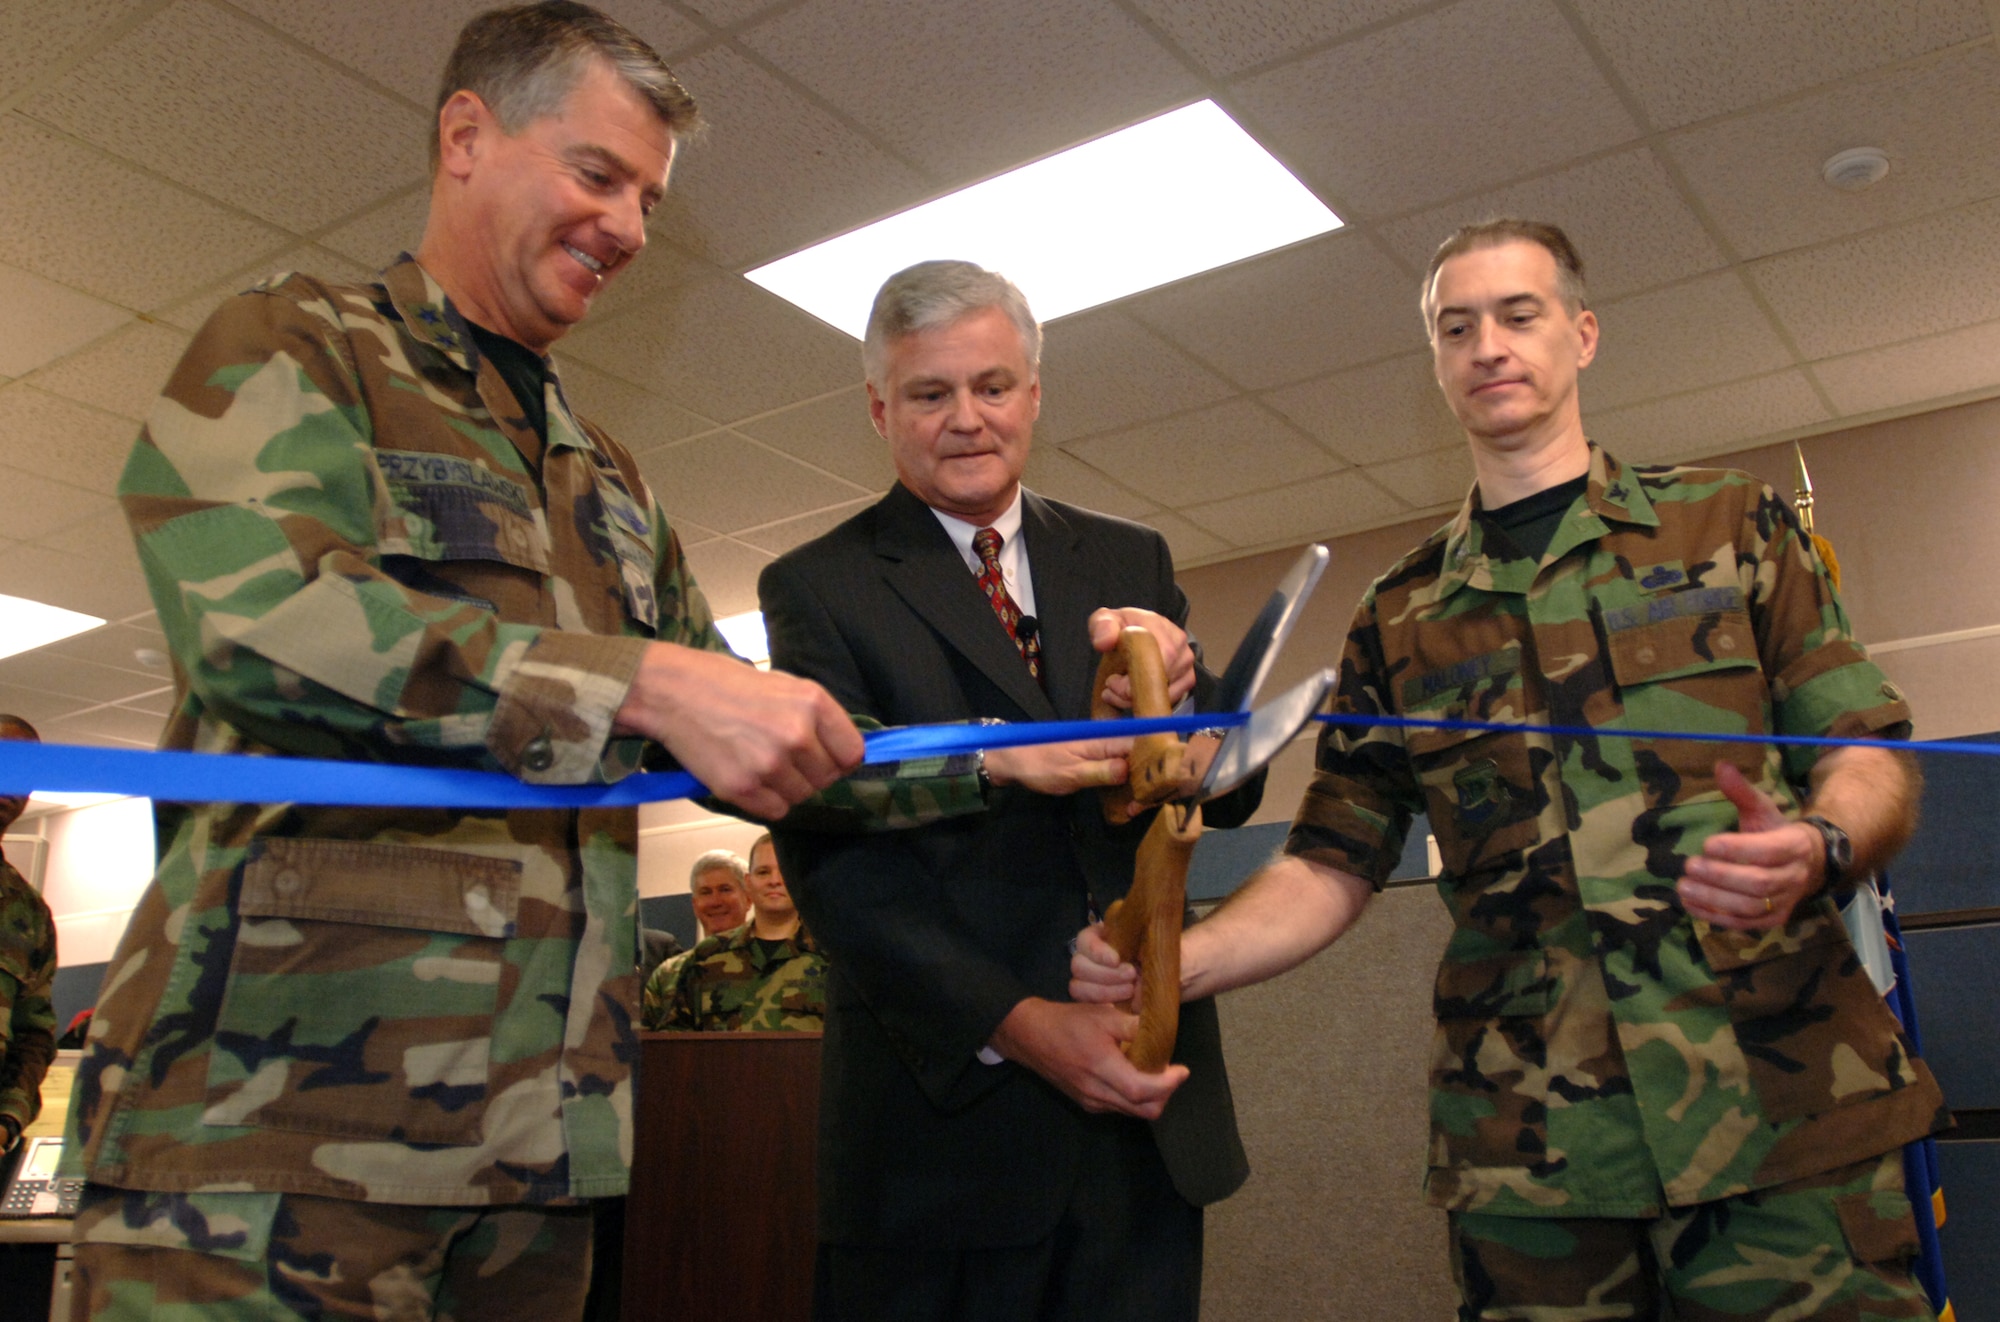 Left to right, Maj. Gen. Tony Przybyslawski, Air Force Personnel Center commander, Roger Blanchard, deputy A1, and Col. Michael Maloney, AFPC director of personnel, cut the ribbon to symbolize the operational beginning of the new Personnel Service Delivery System at Randolph Air Force Base, Texas, on Friday, March 31, 2006. (U.S. Air Force photo/Tech. Sgt. Cecilio Ricardo Jr.)